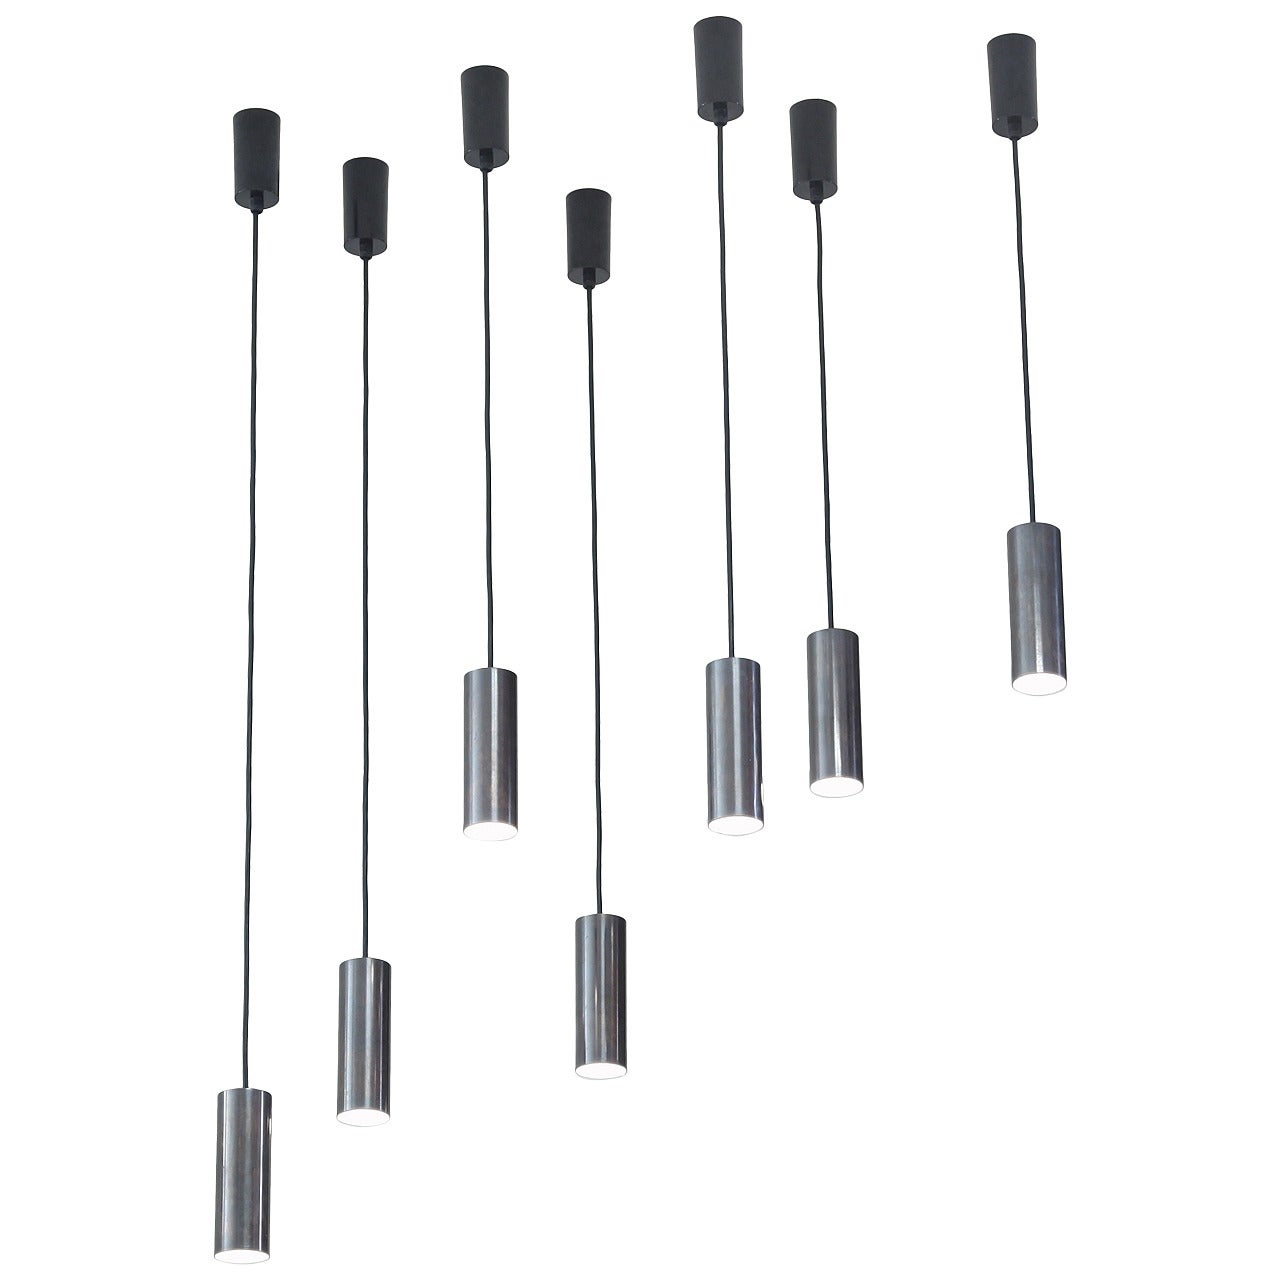 Set of Seven Minimalist Pendant Lamps with Gunmetal Finish, 1960s For Sale